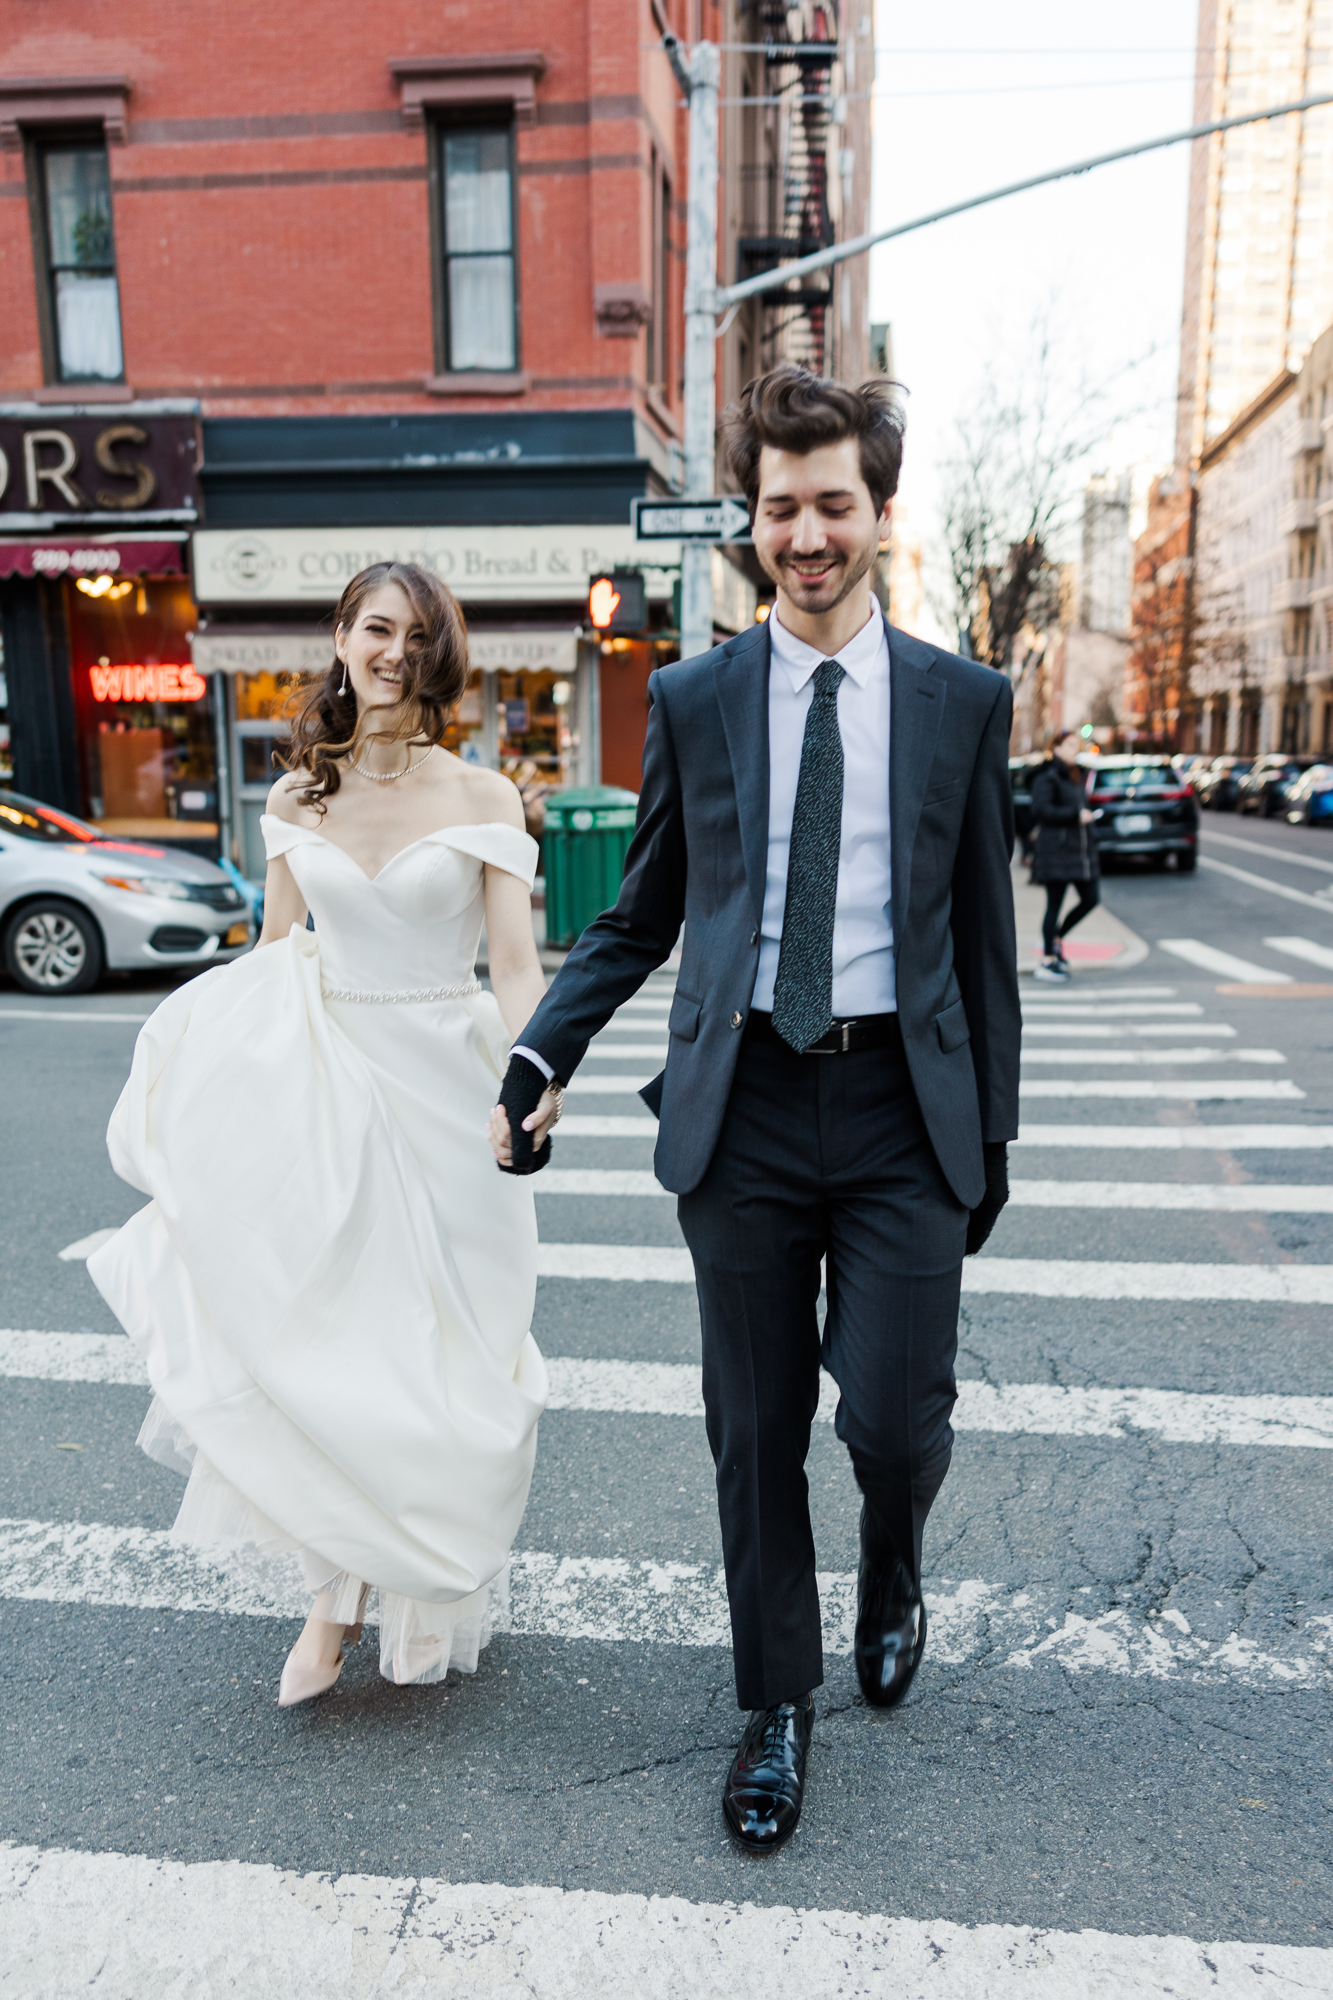 Vibrant Living Room Elopement Photos in NYC